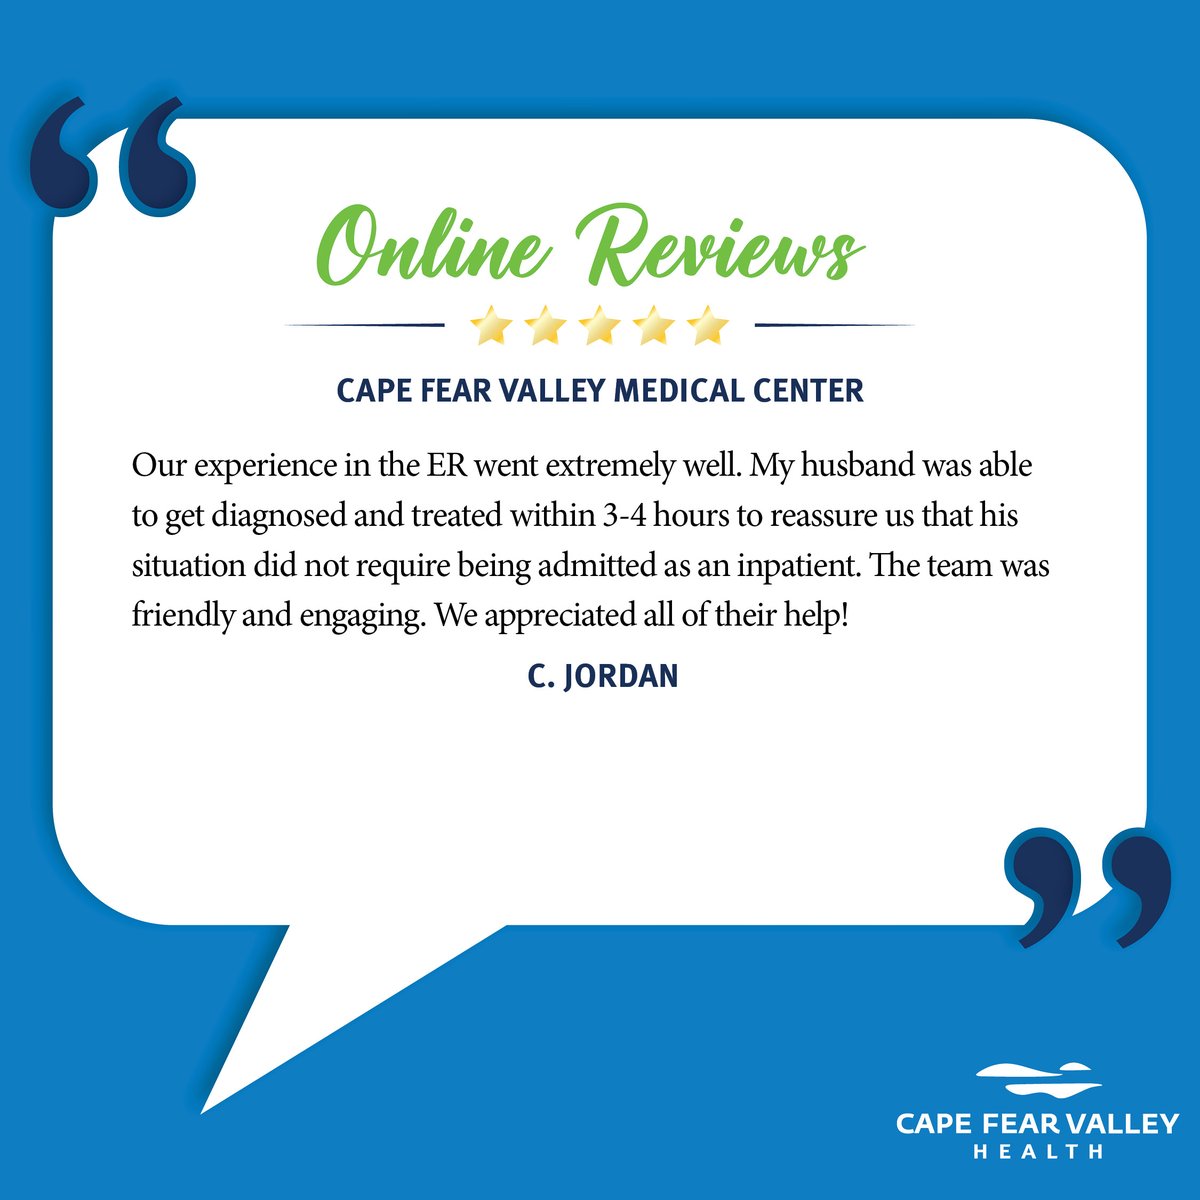 Thank you for the review, Marci! We appreciate you choosing our care team; we hope you're feeling better now! If you've had a great experience at any Cape Fear Valley Health or Harnett Health facility, we'd like to hear about it. Inbox us to share your story today!